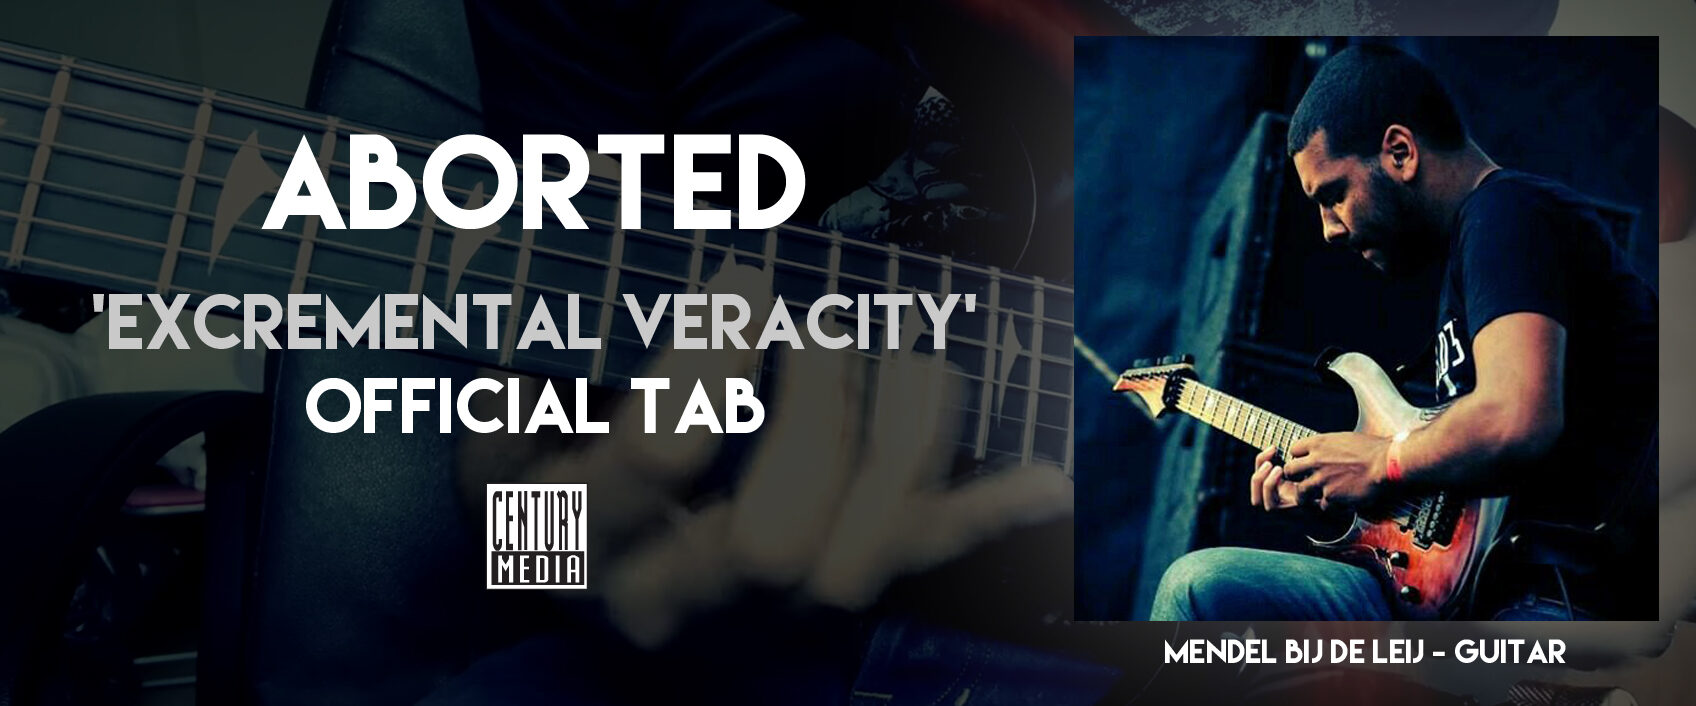 Learn to Play "Excremental Veracity" by Aborted with @Mendelmusic